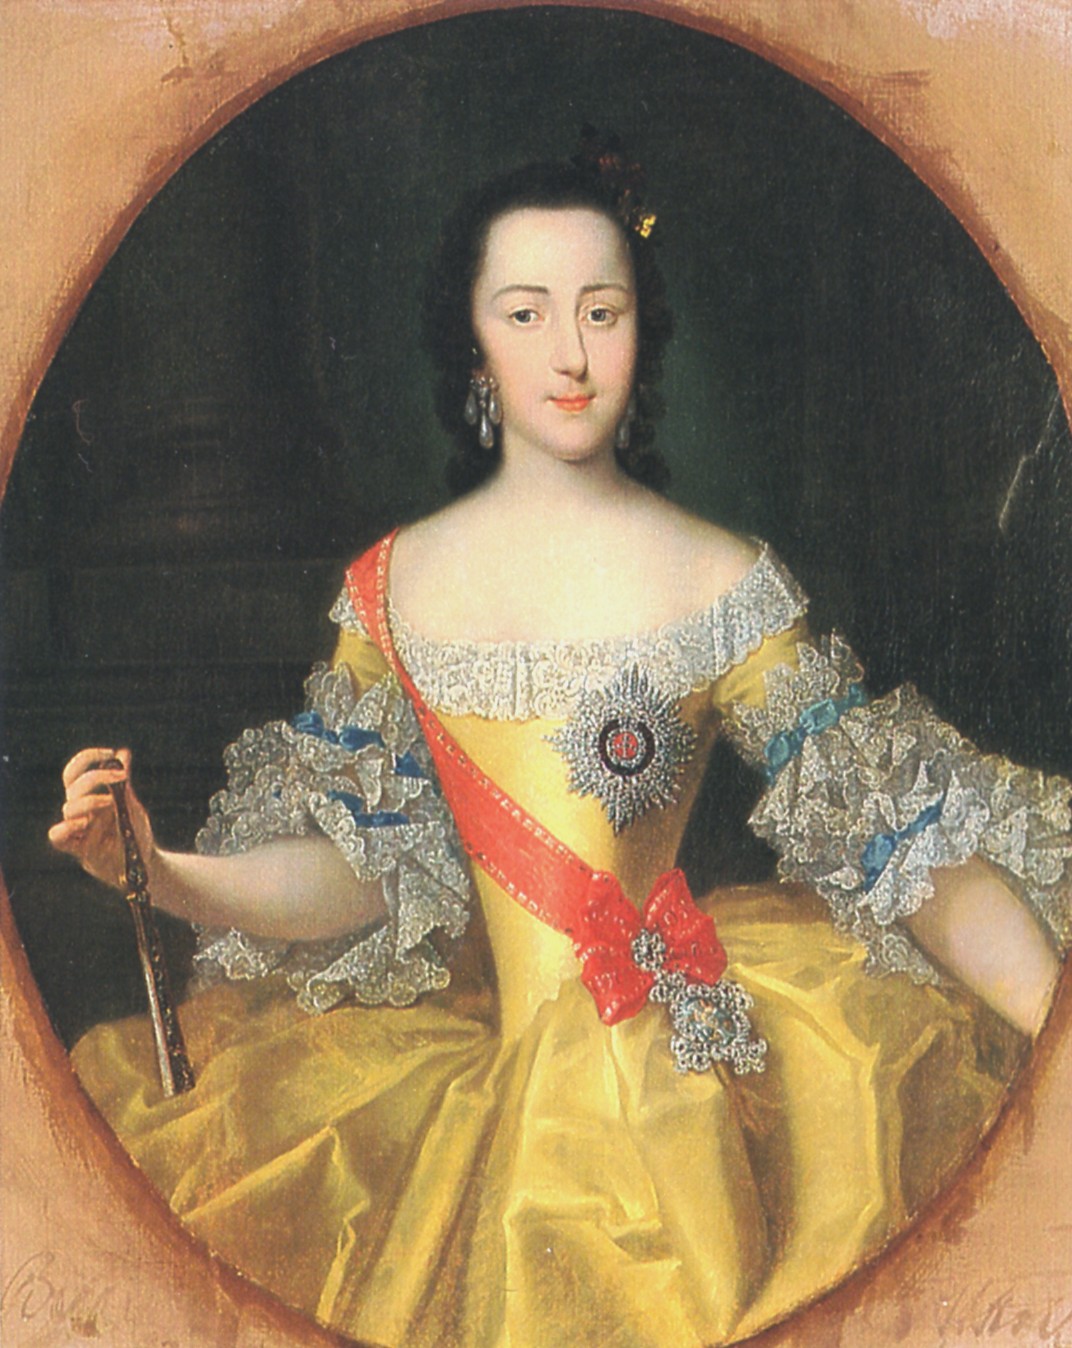 Painting of a young Catherine dressing ayellow dress and a red band